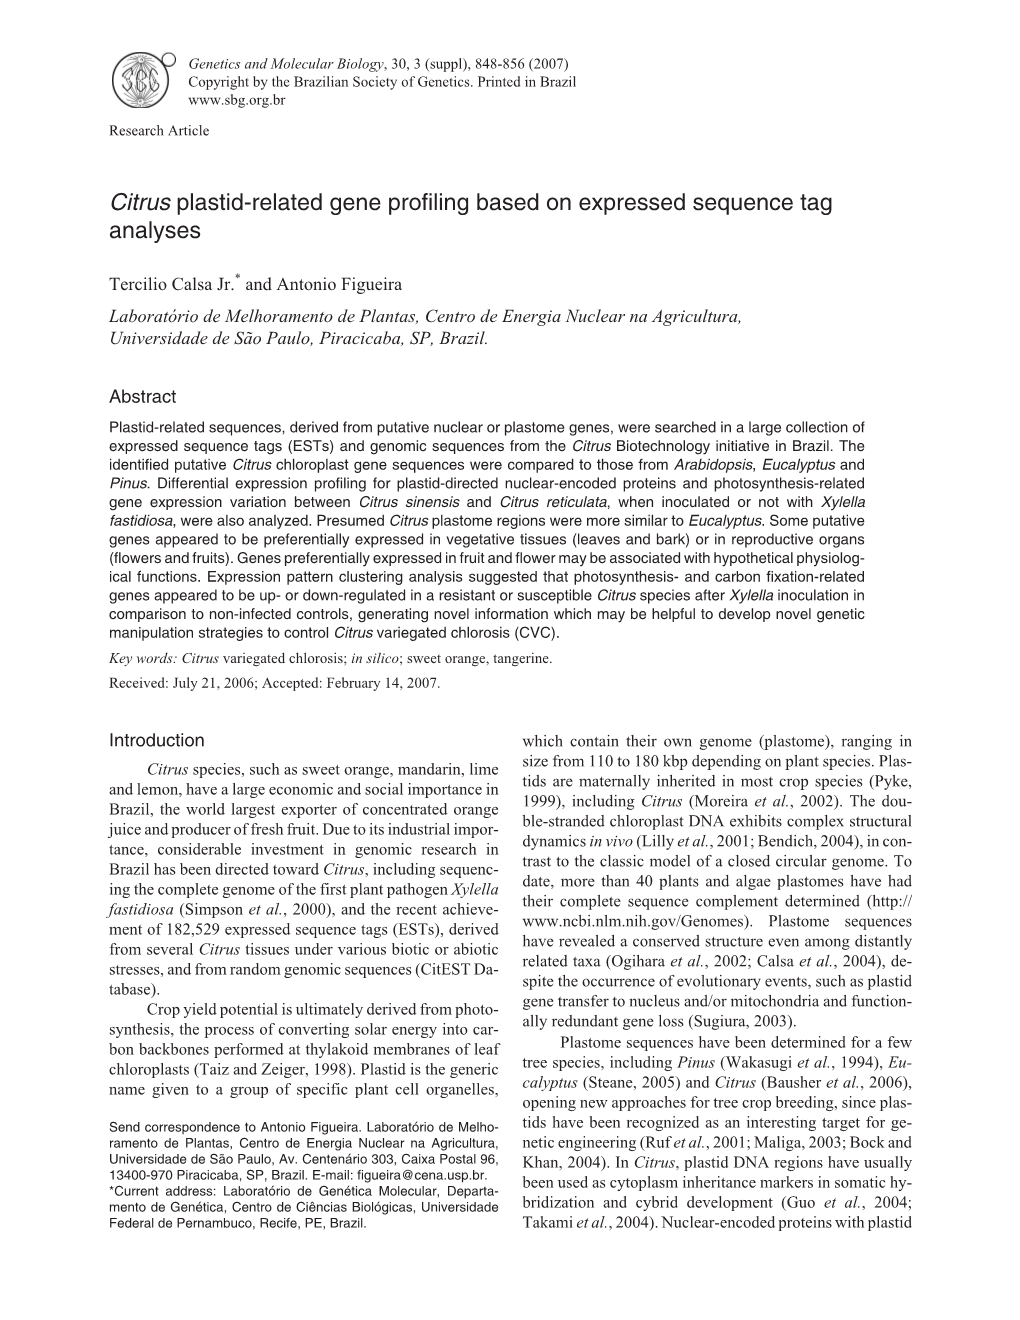 Citrus Plastid-Related Gene Profiling Based on Expressed Sequence Tag Analyses